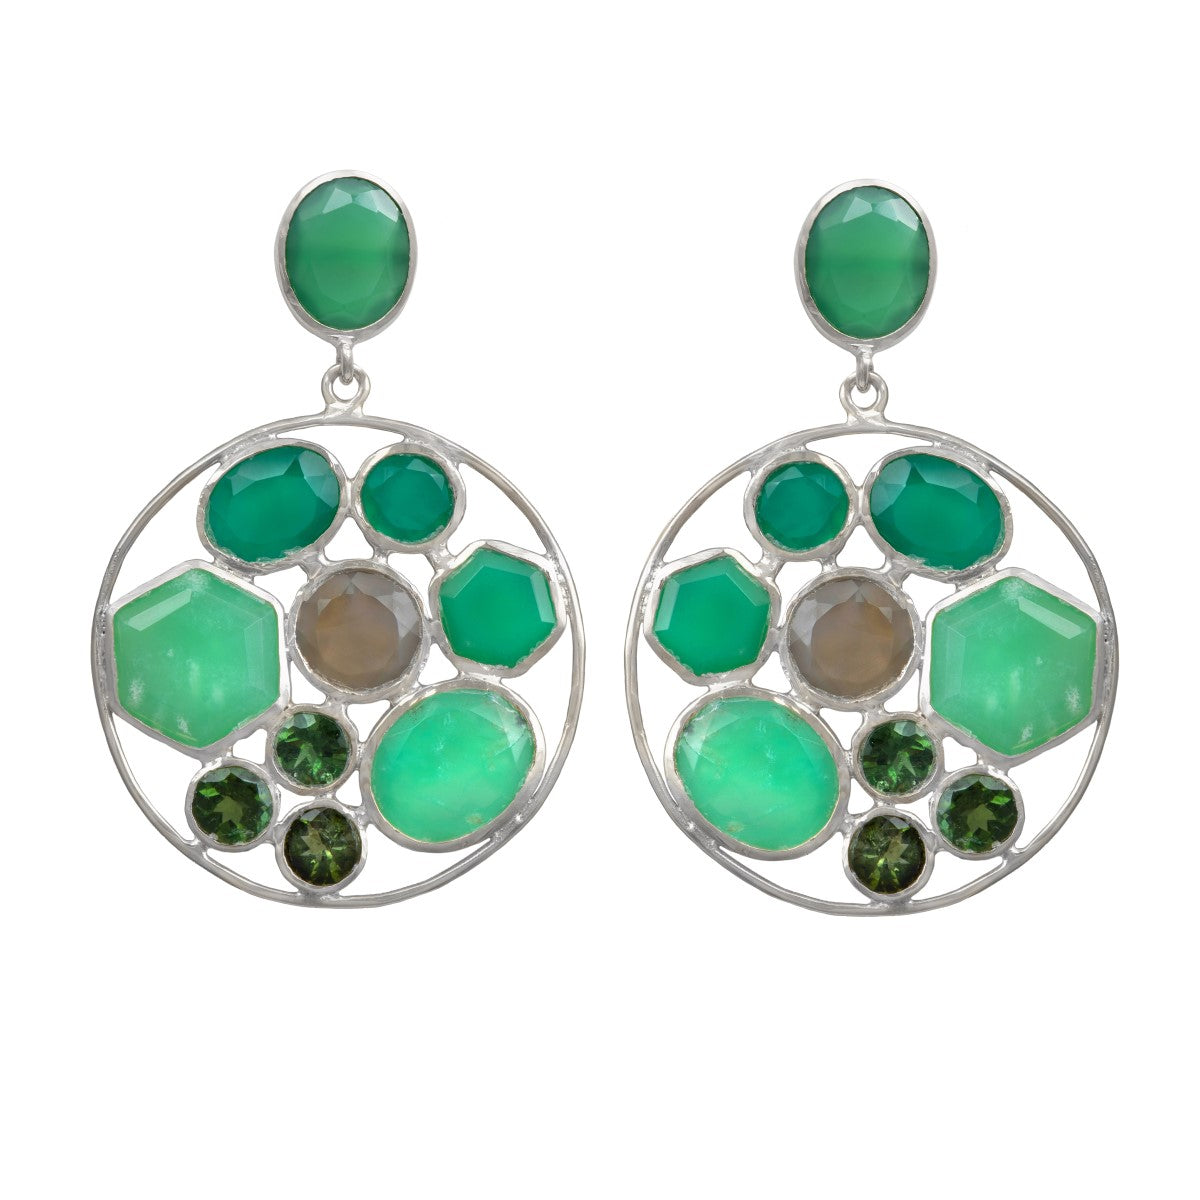 Long Gemstone Earrings with a Round Disc Drop with Stones in Sterling Silver - Green Chalcedony and Green Onyx